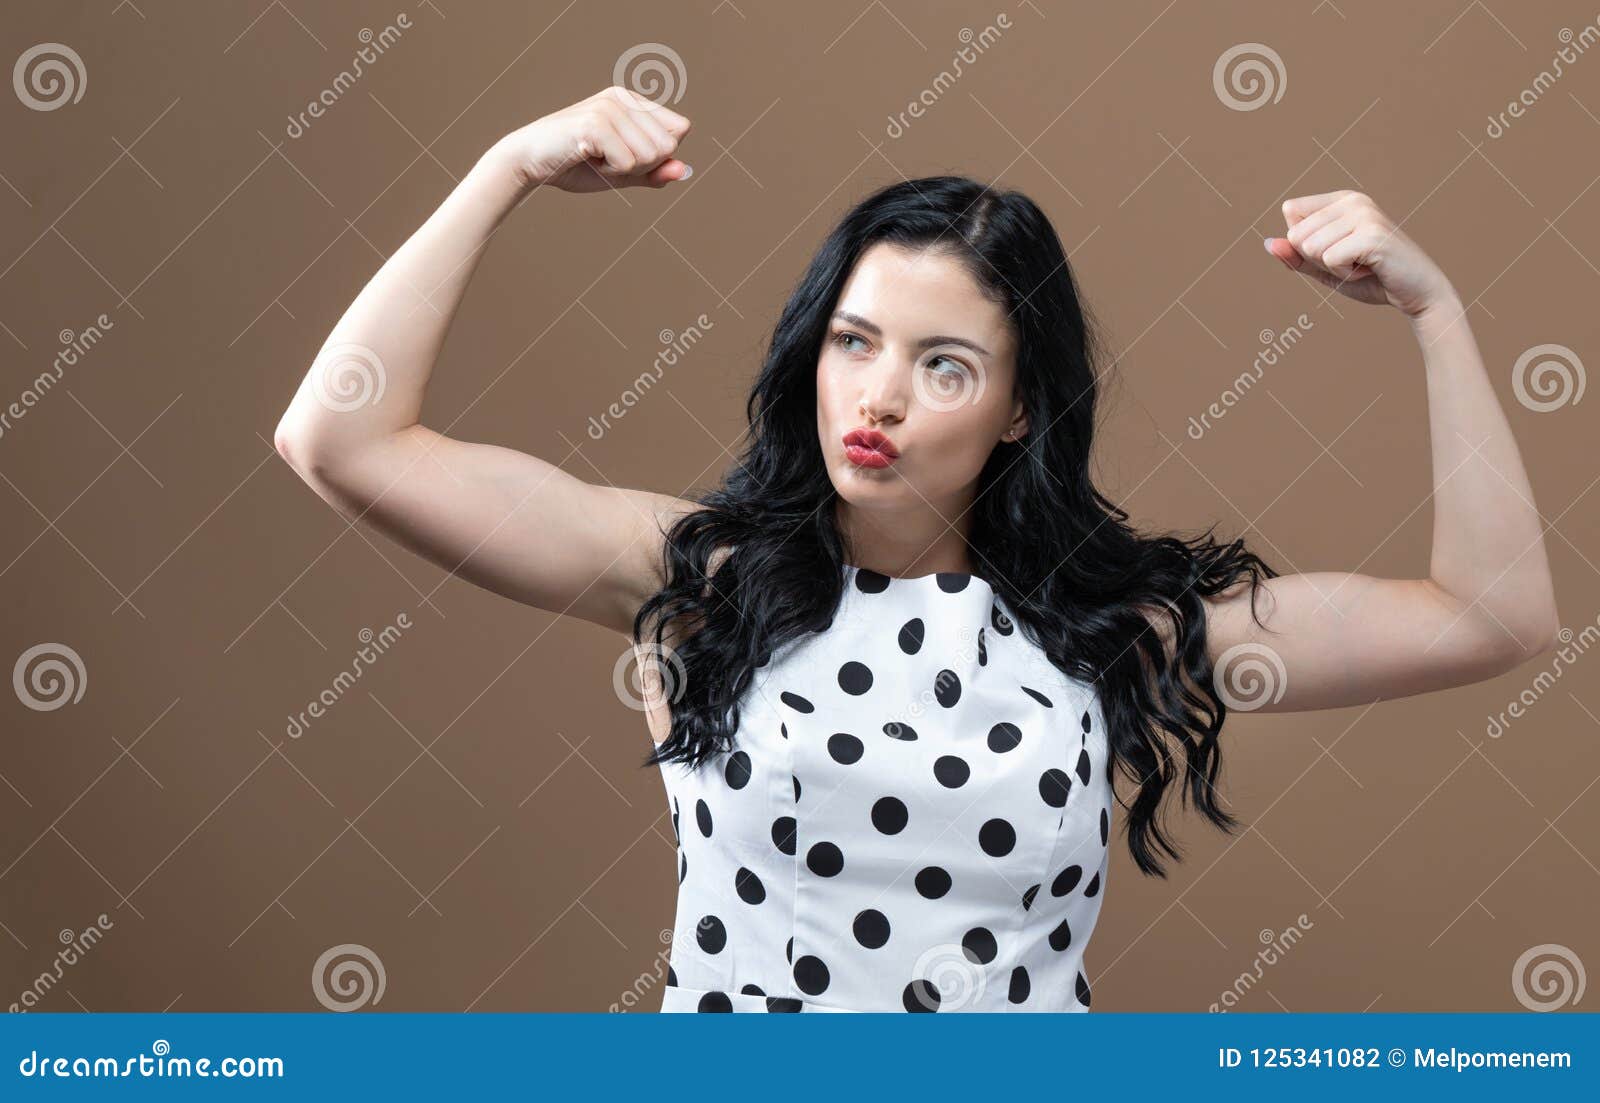 Powerful young woman in success pose - stock photo 852551 | Crushpixel